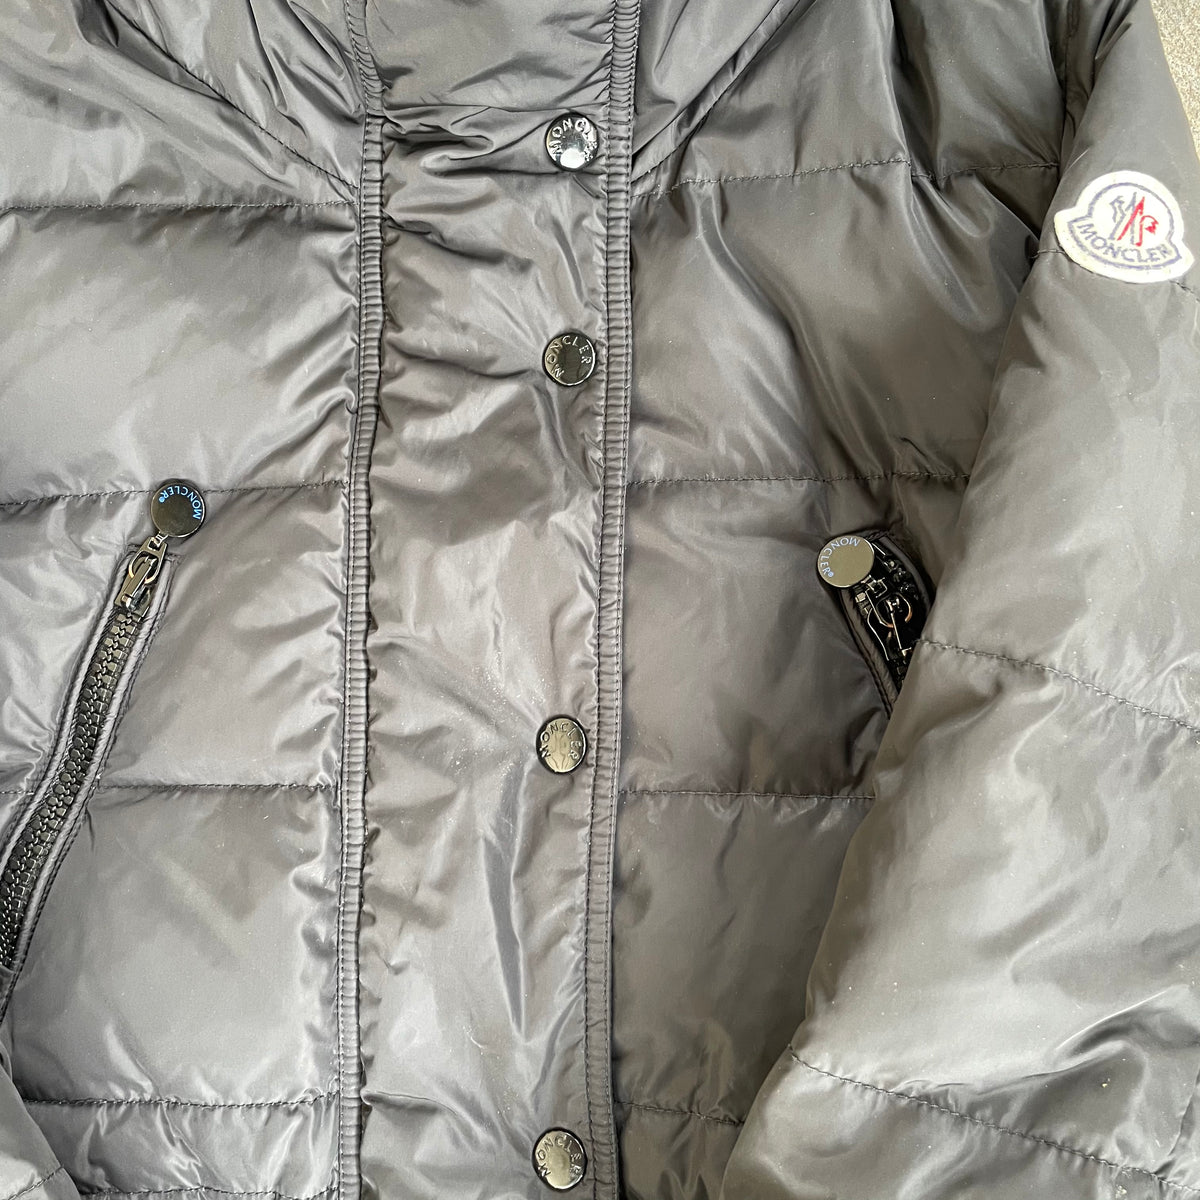 Moncler Women's Fragon Giubbotto Down Puffer Jacket Size S – Curated by ...